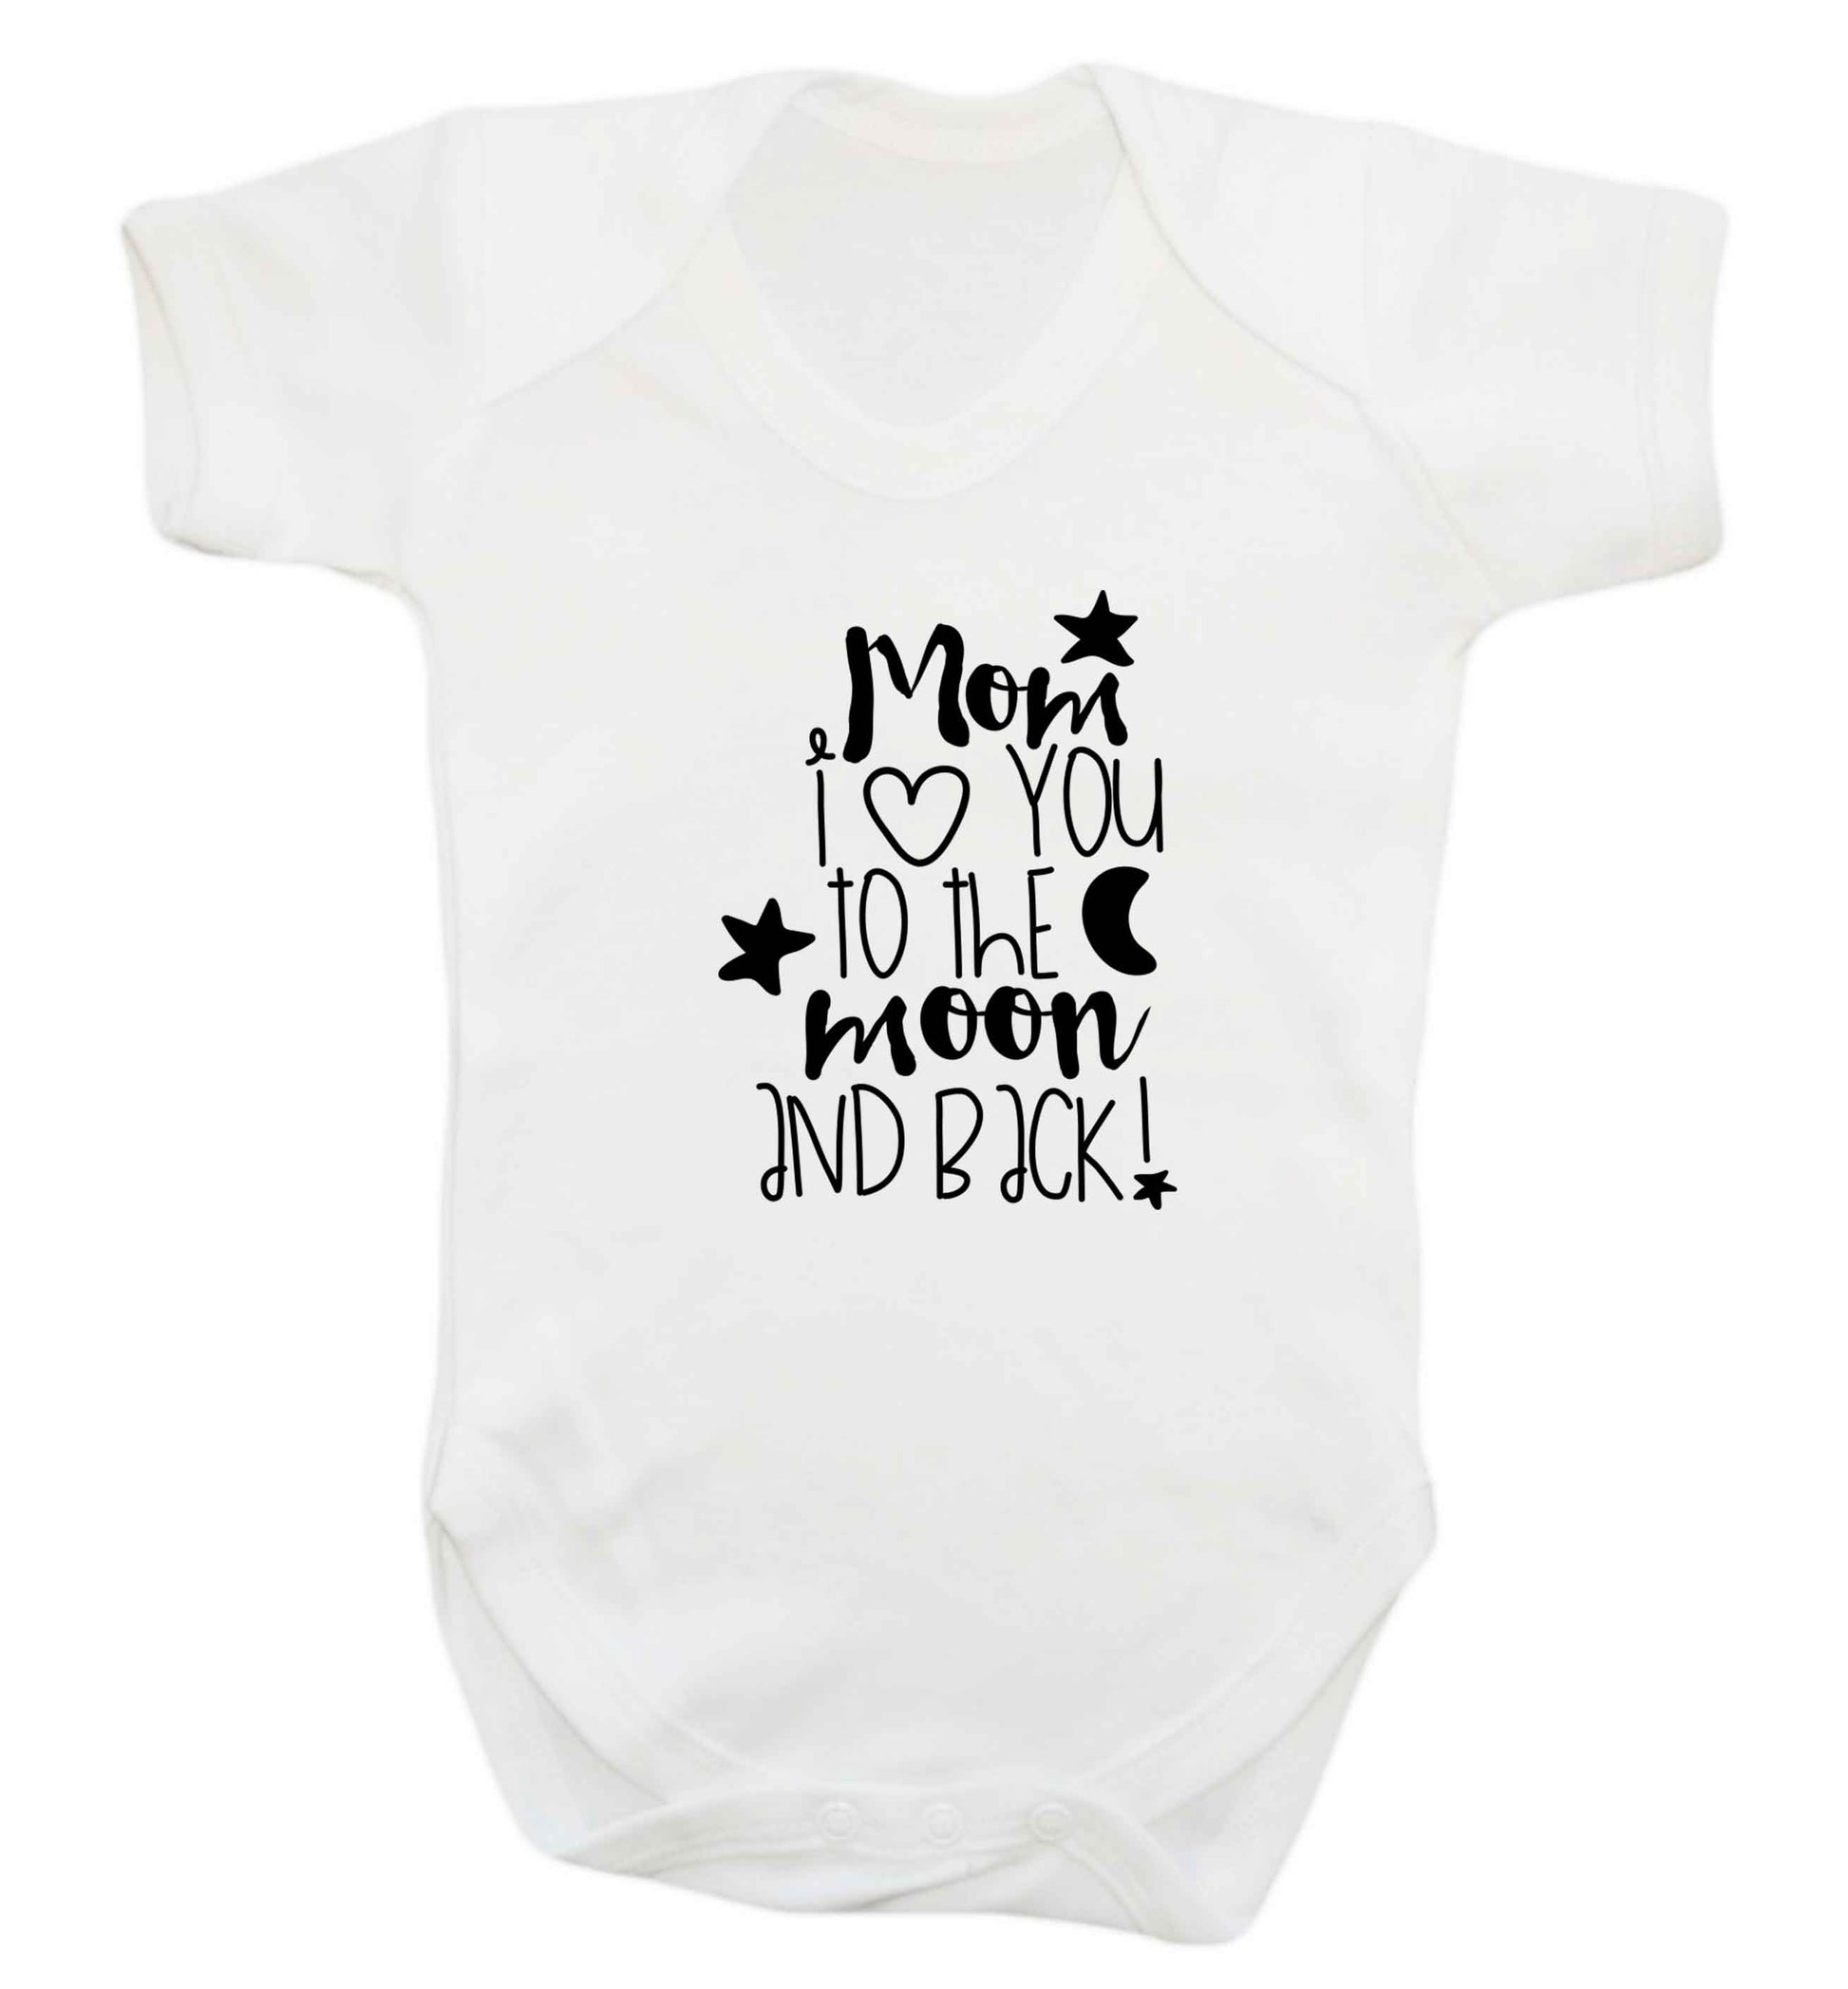 Mom I love you to the moon and back baby vest white 18-24 months